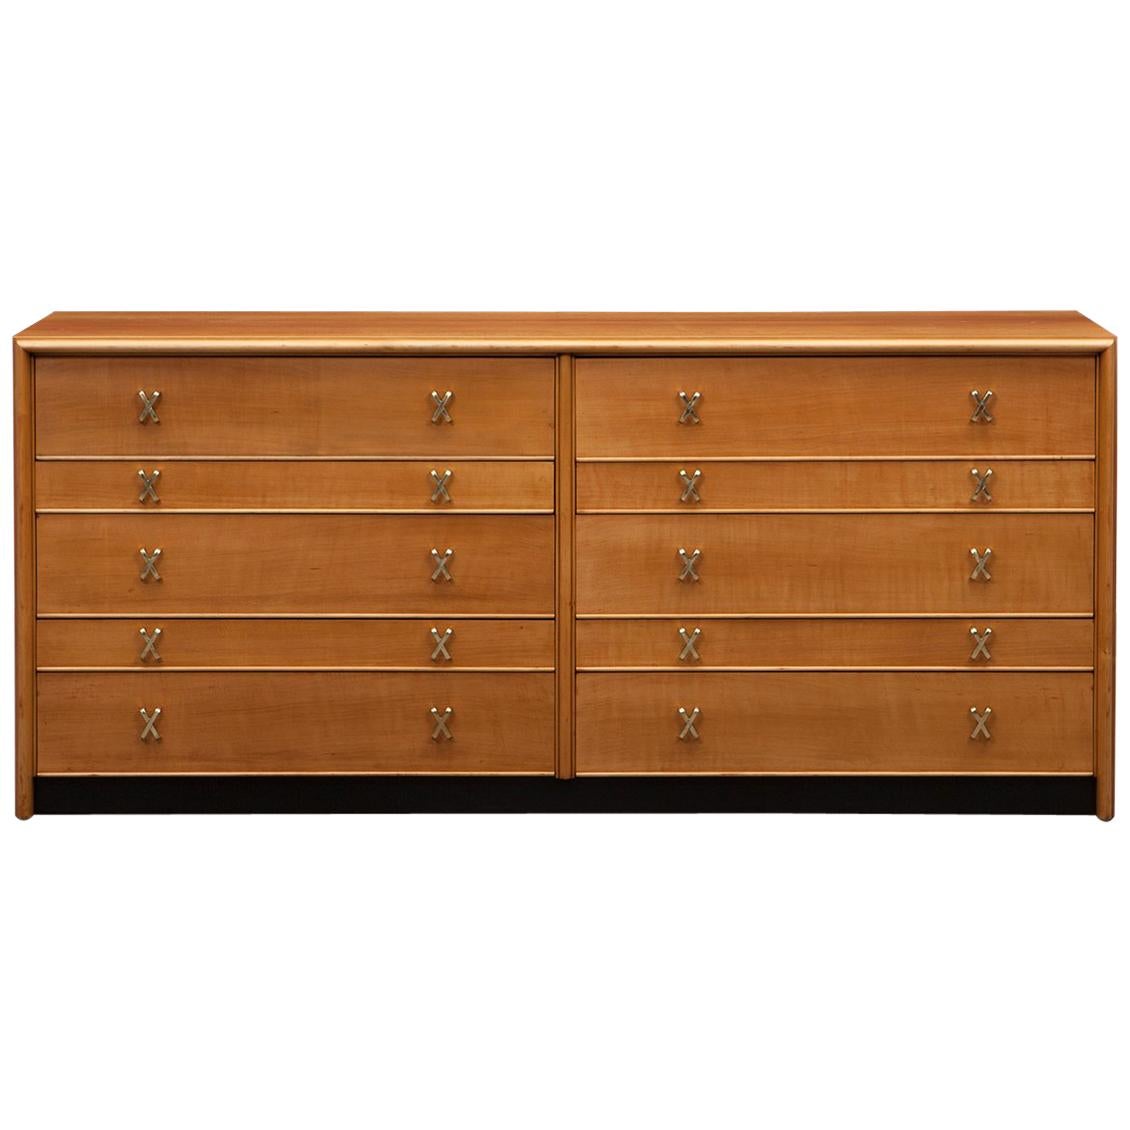 1950s Brown Birch Sideboard by Paul Frankl 'b' For Sale